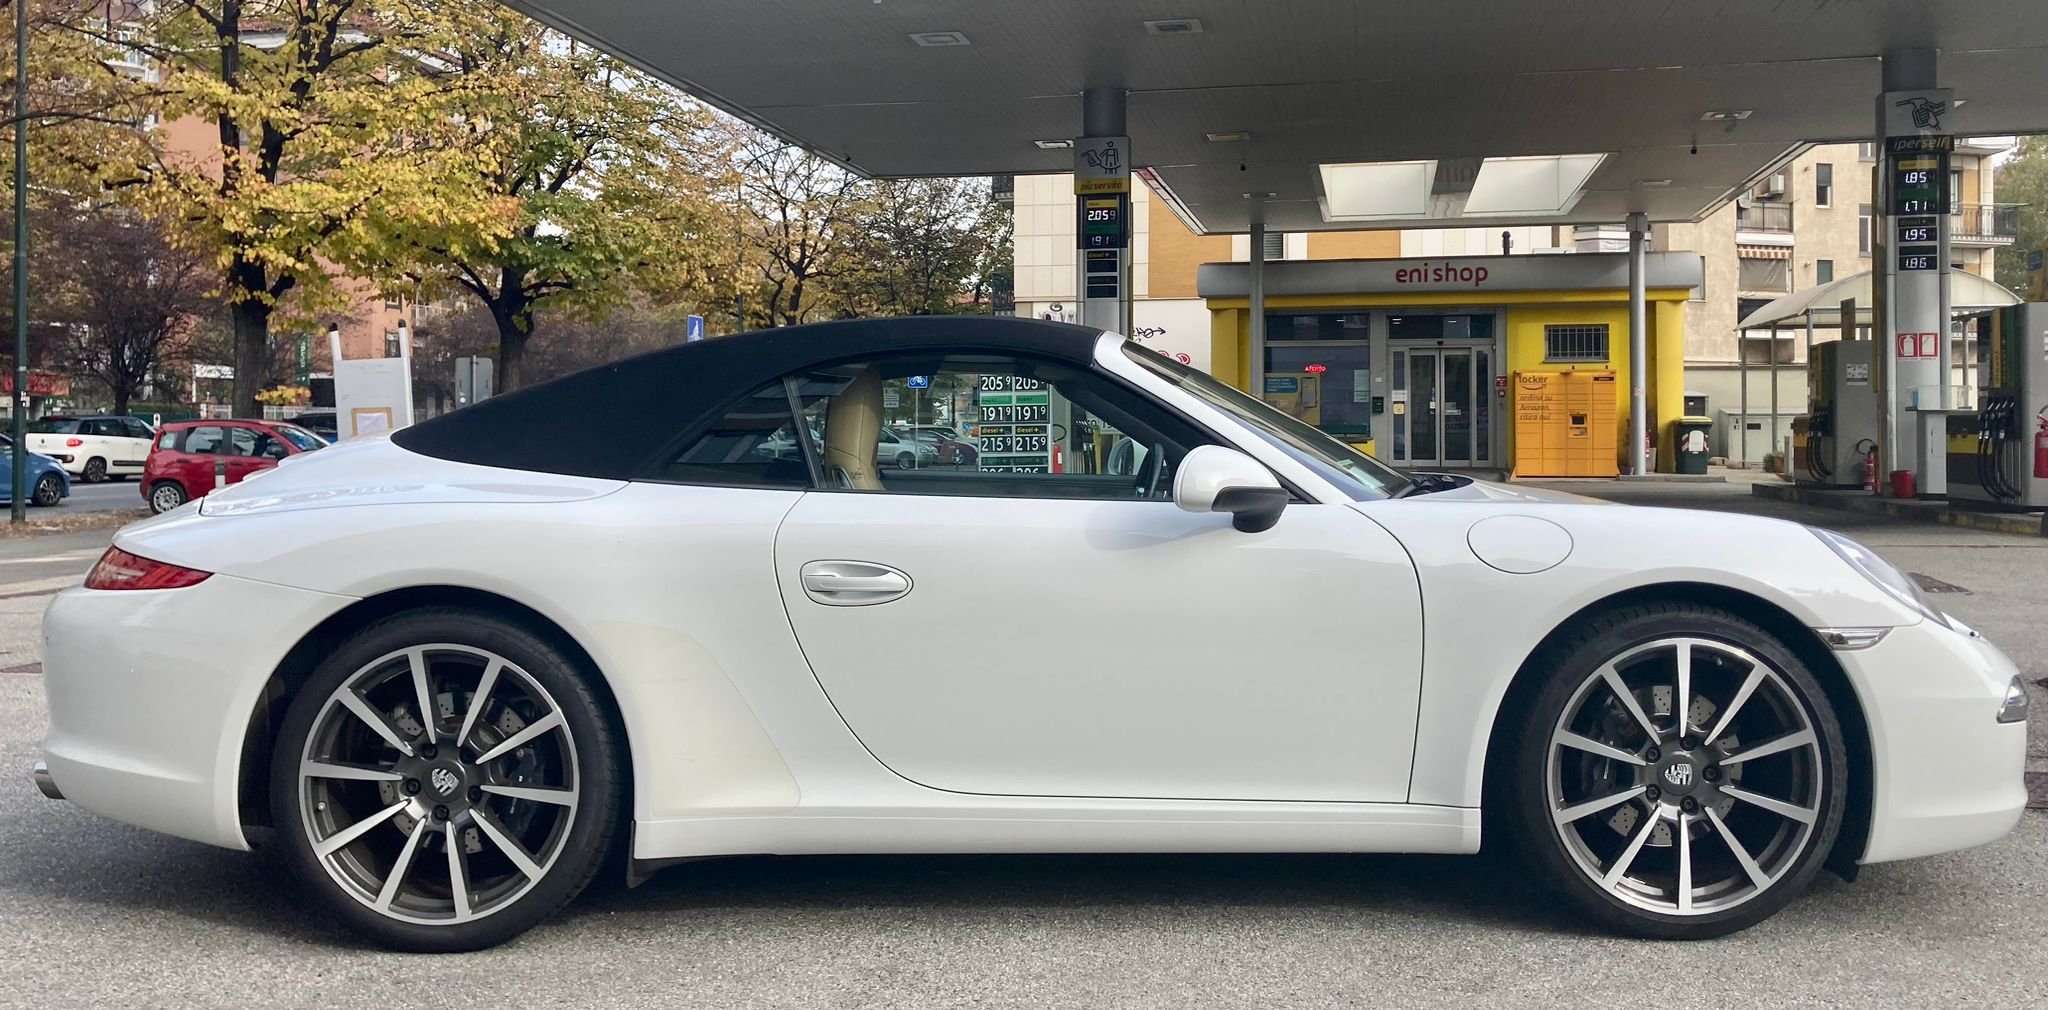 Porsche 911 Convertible in White used in Torino - To for € 96,890.-